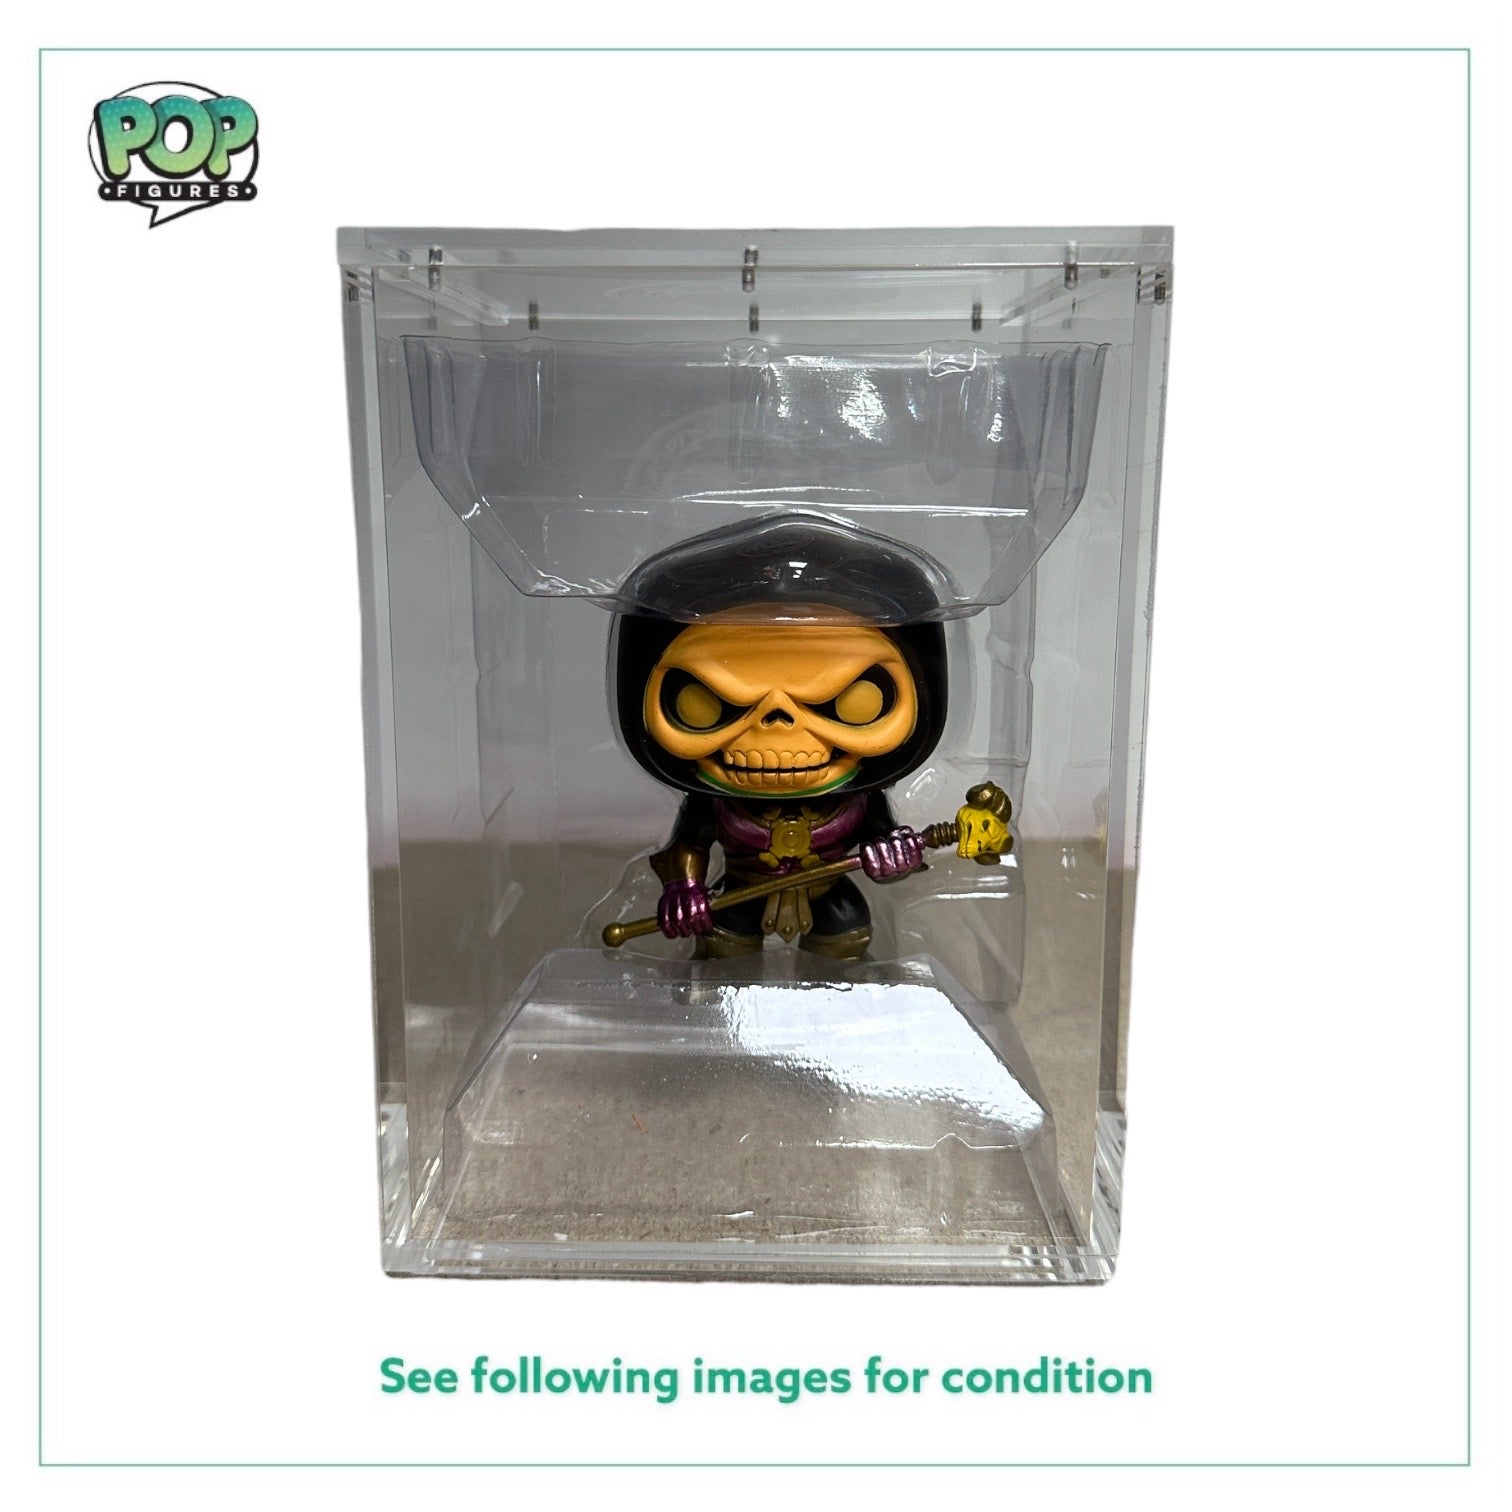 OUT OF BOX: Skeletor #19 (Disco) Funko Pop! - Masters of the Universe - SDCC 2013 Exclusive LE480 Pcs